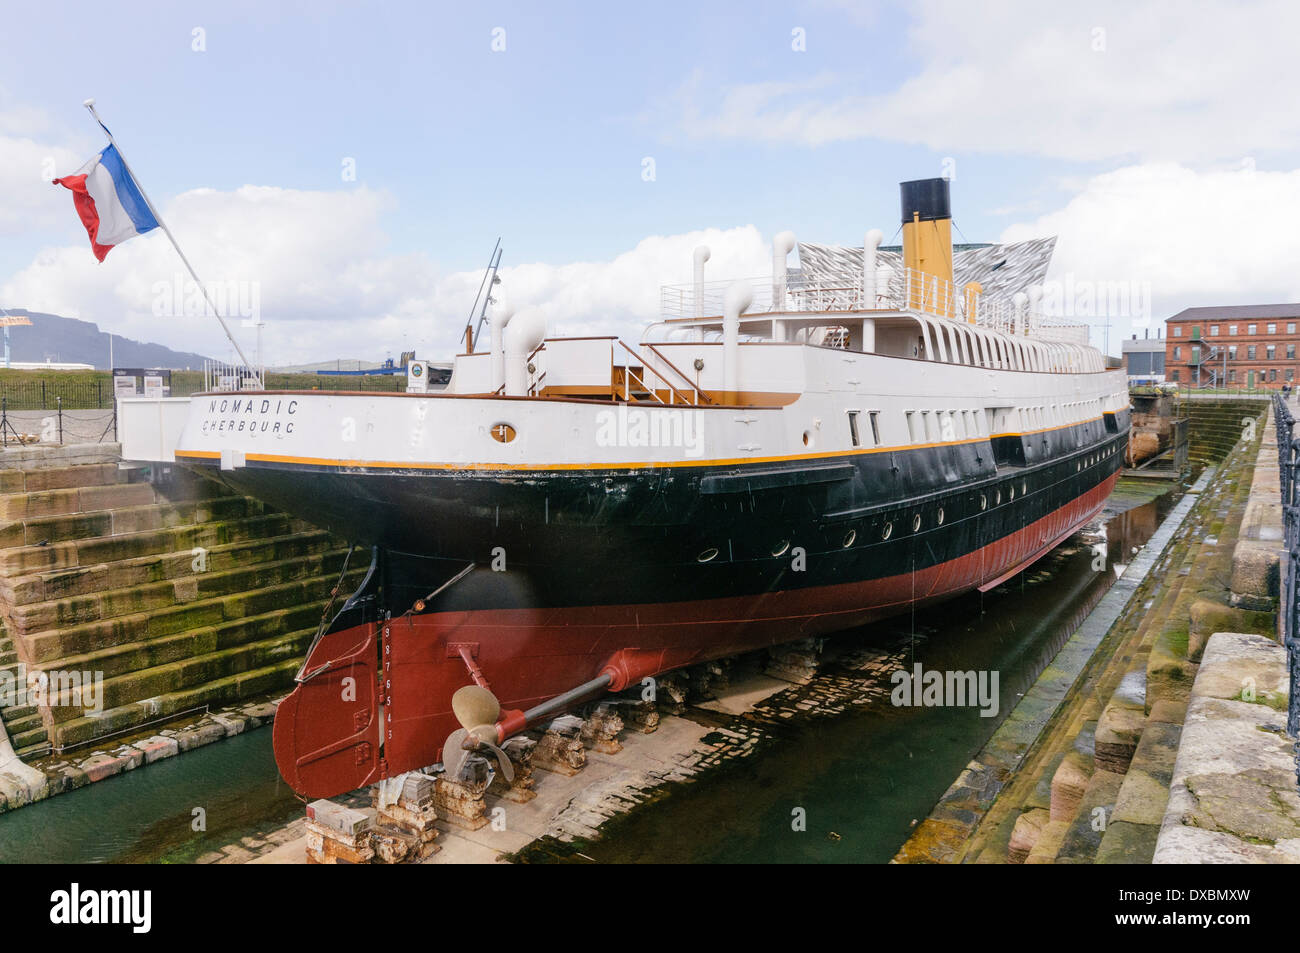 Nomadic, the only surviving White Star Line ship, built to ferry passengers to and from the Titanic Stock Photo